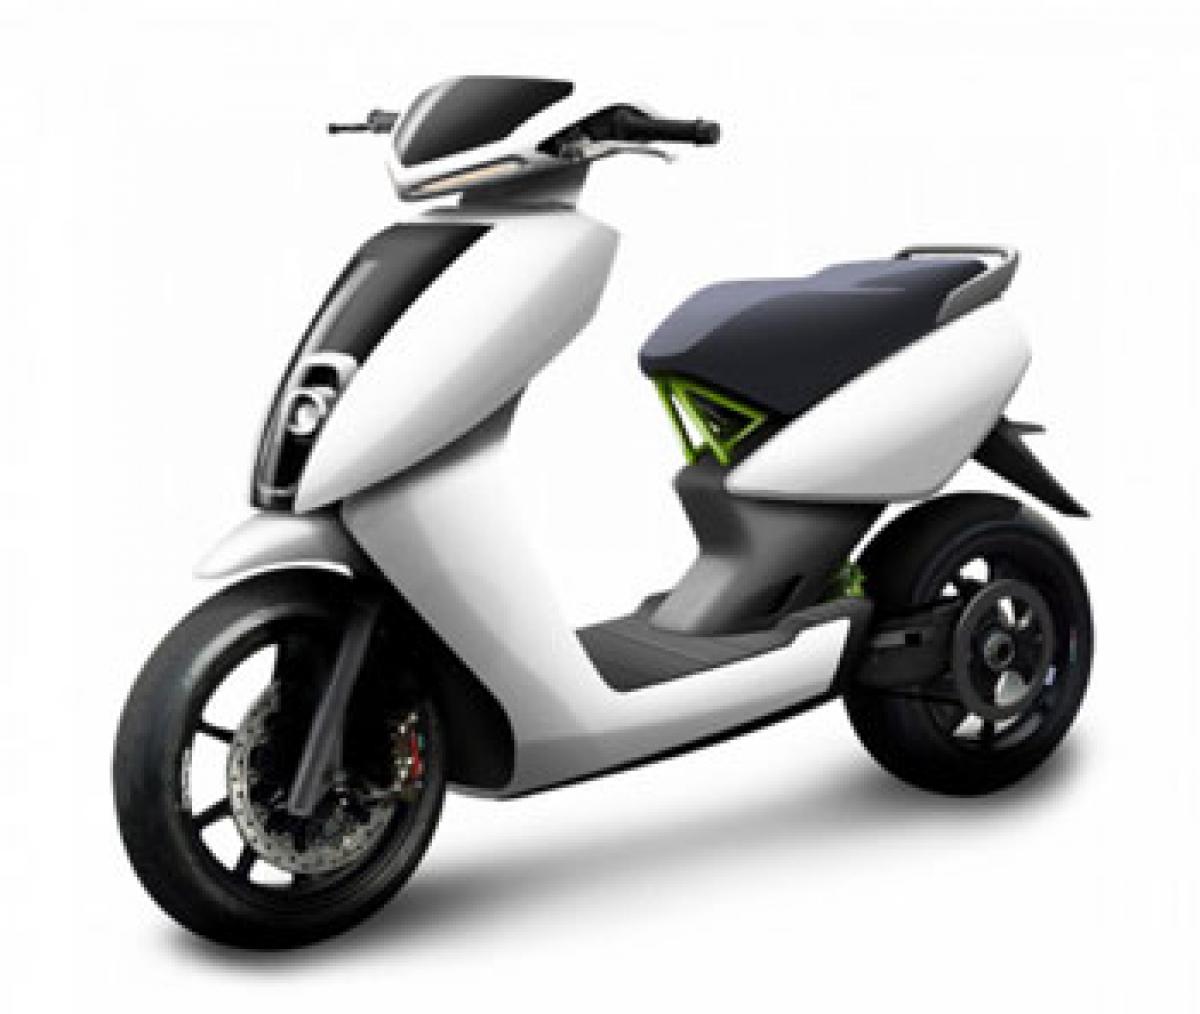 Ather Energy unveils S340 electric scooter